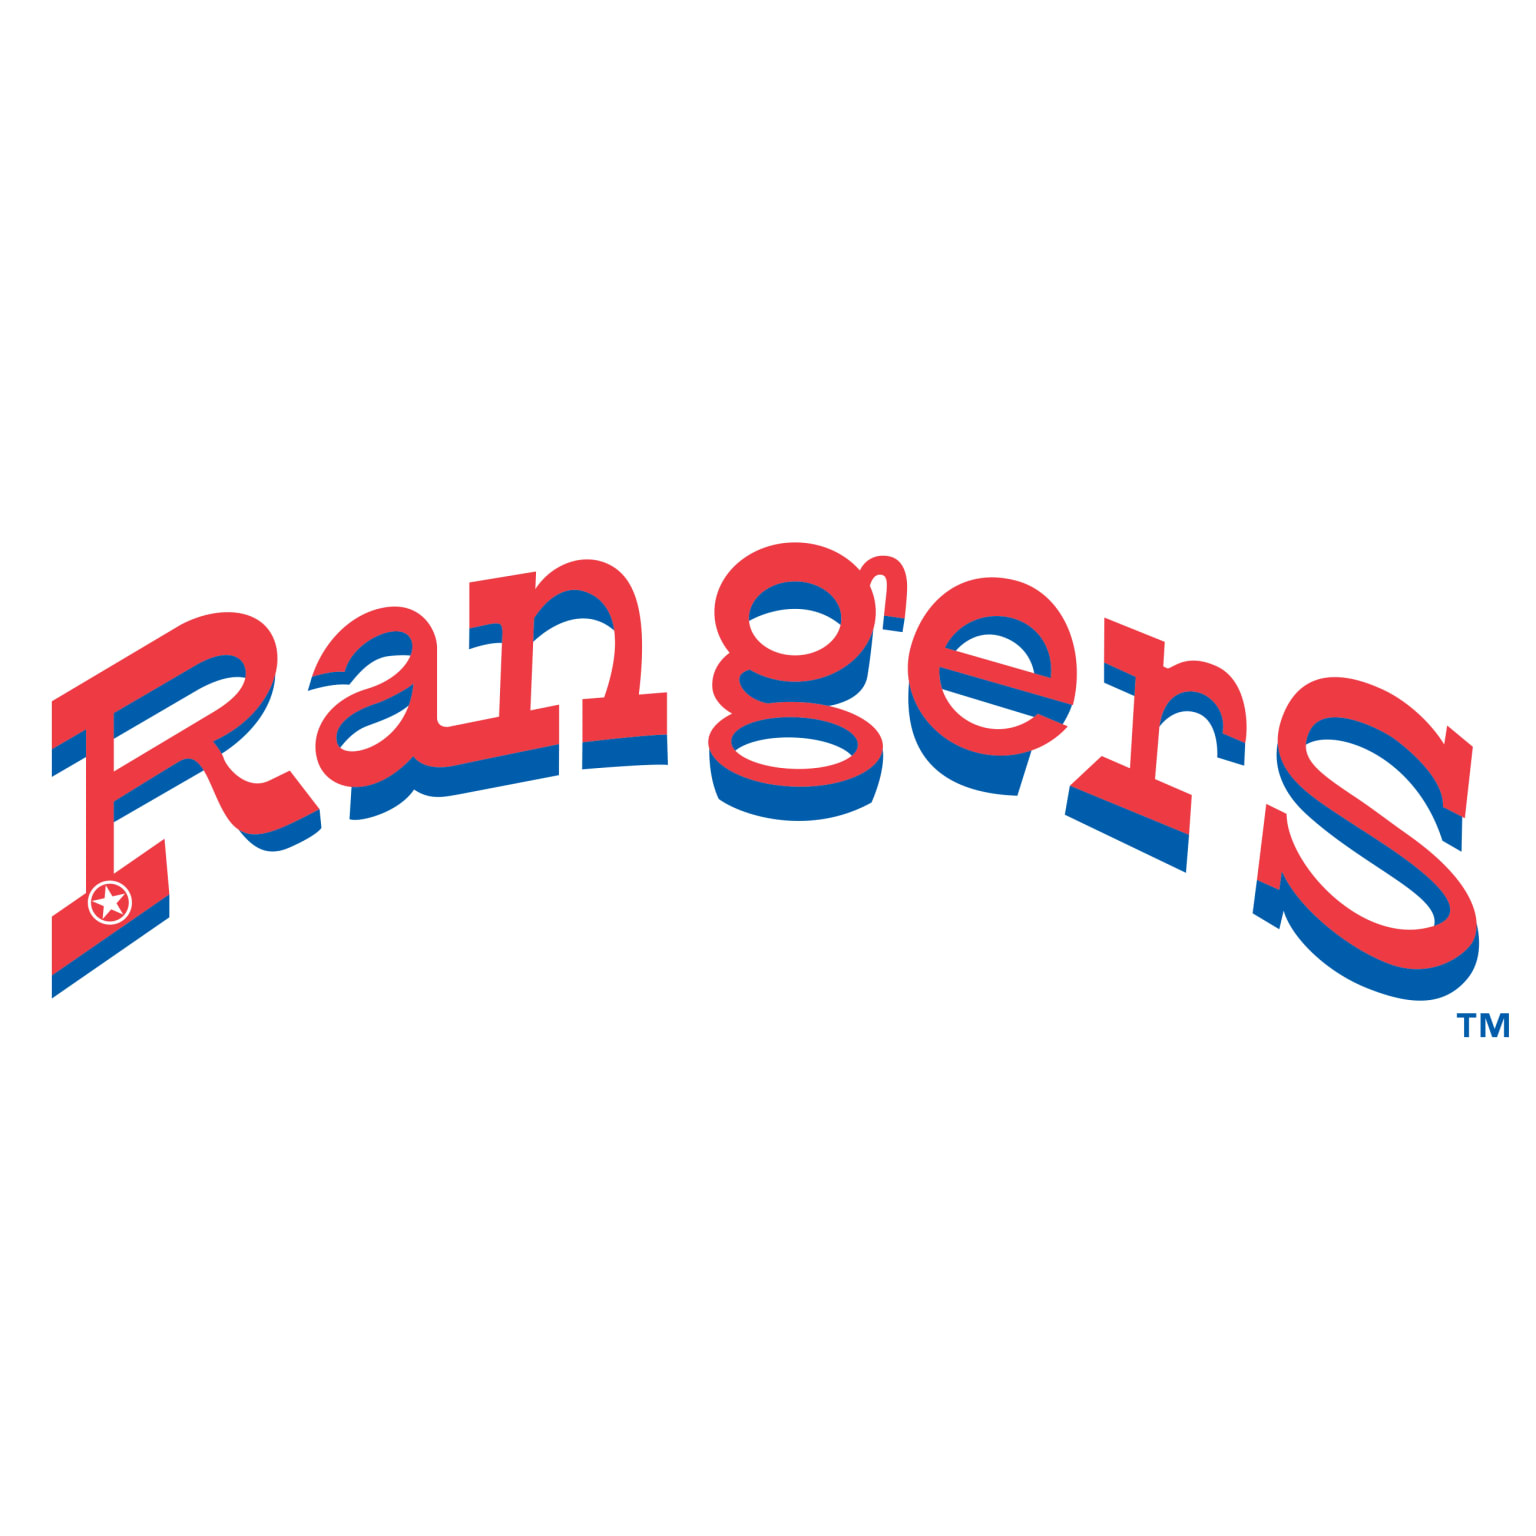 The Jersey Logo of the Texas Rangers (AL) from 1994-2000 #Texas